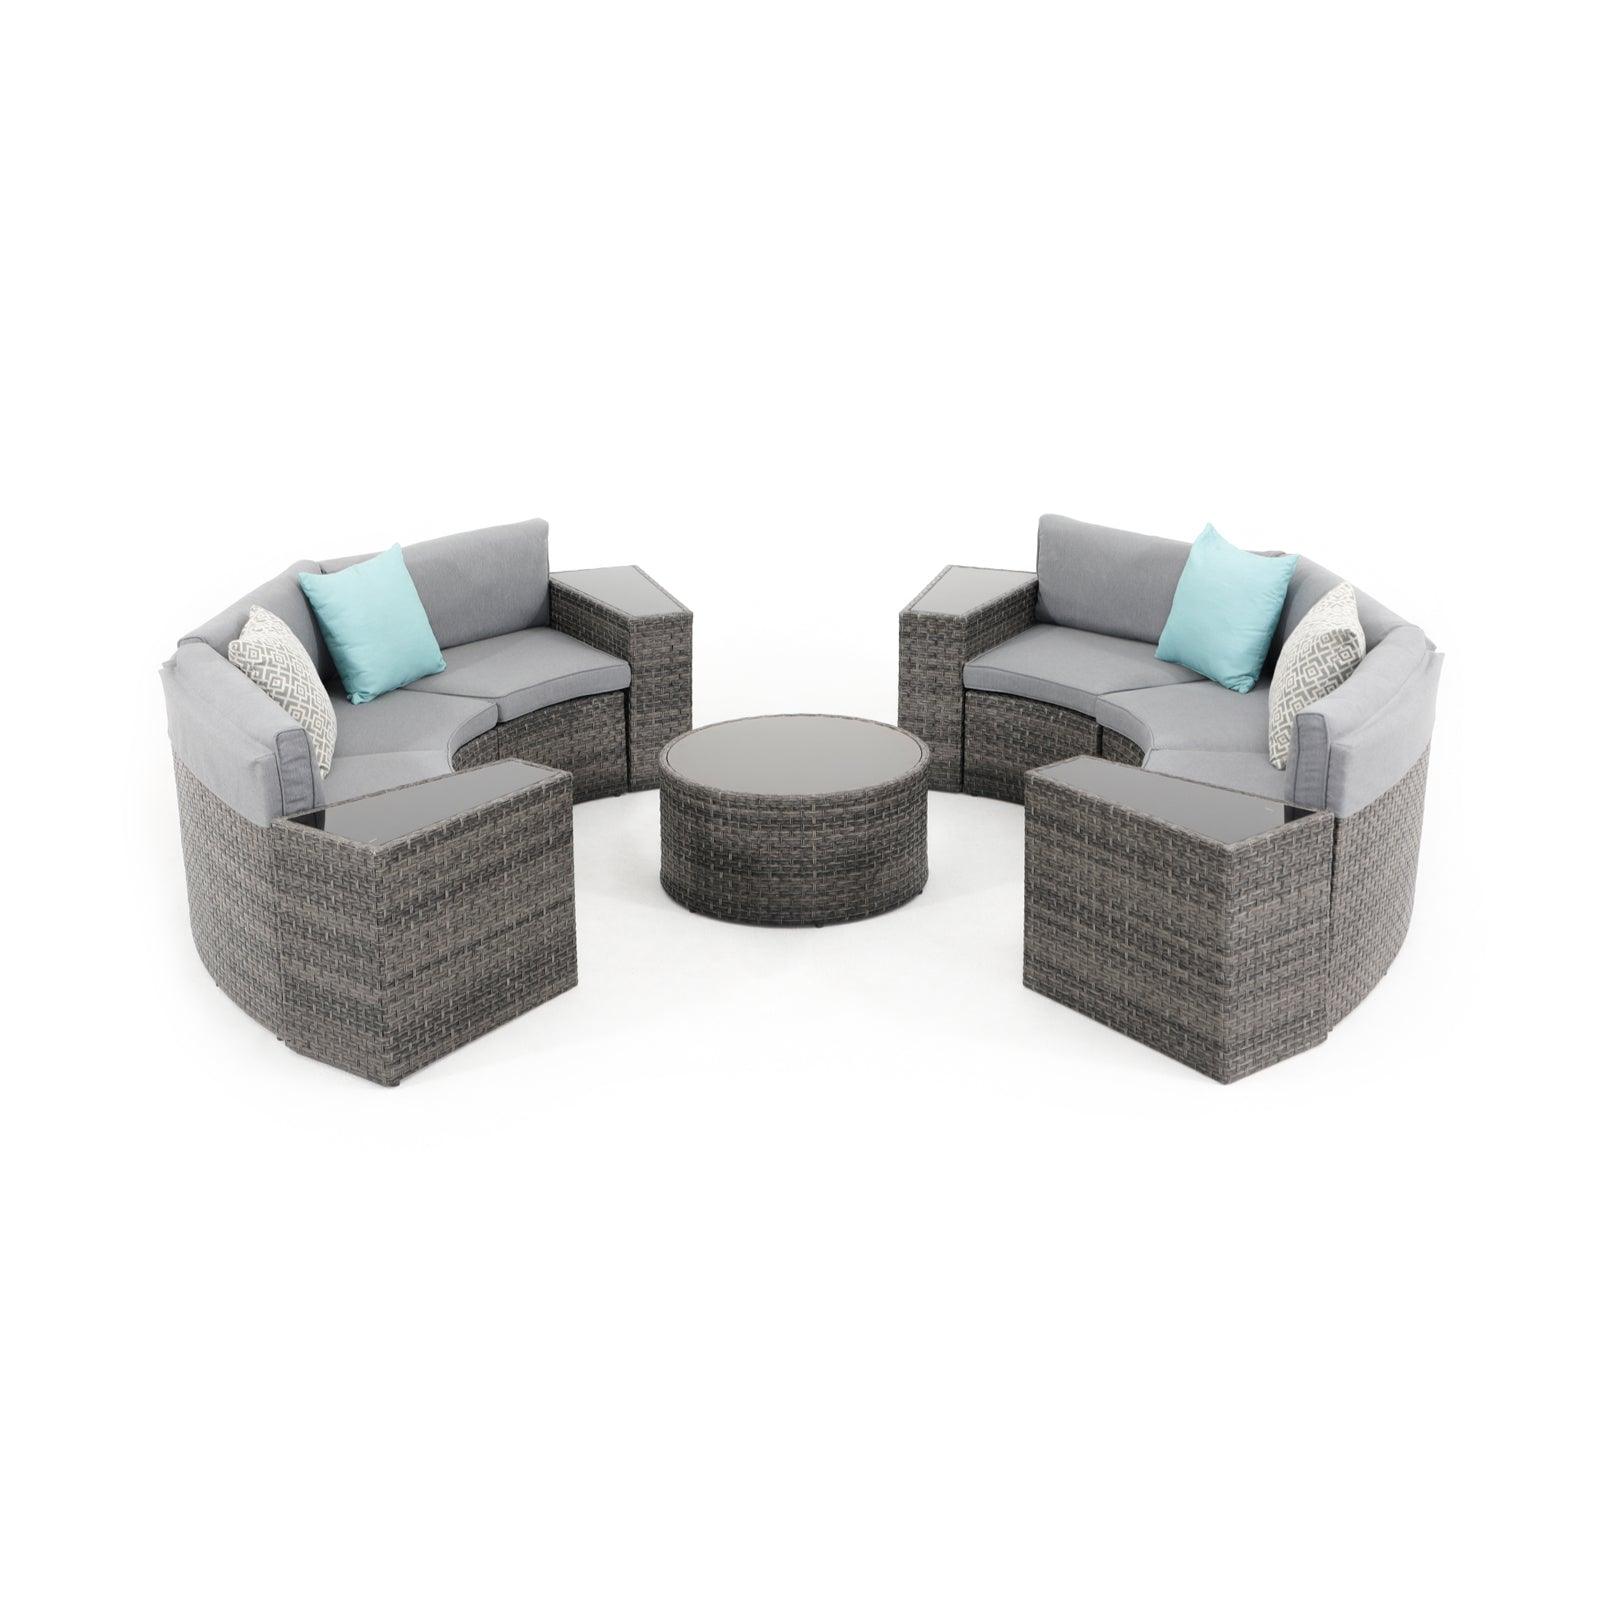 Boboli 11-piece Grey Outdoor Wicker Curved Sectional Set with grey cushions, 1 Round Glass Table, 4 coffee tables, 6 sectional sofas, different combination way - Jardina Furniture #color_Grey #piece_11-pc.